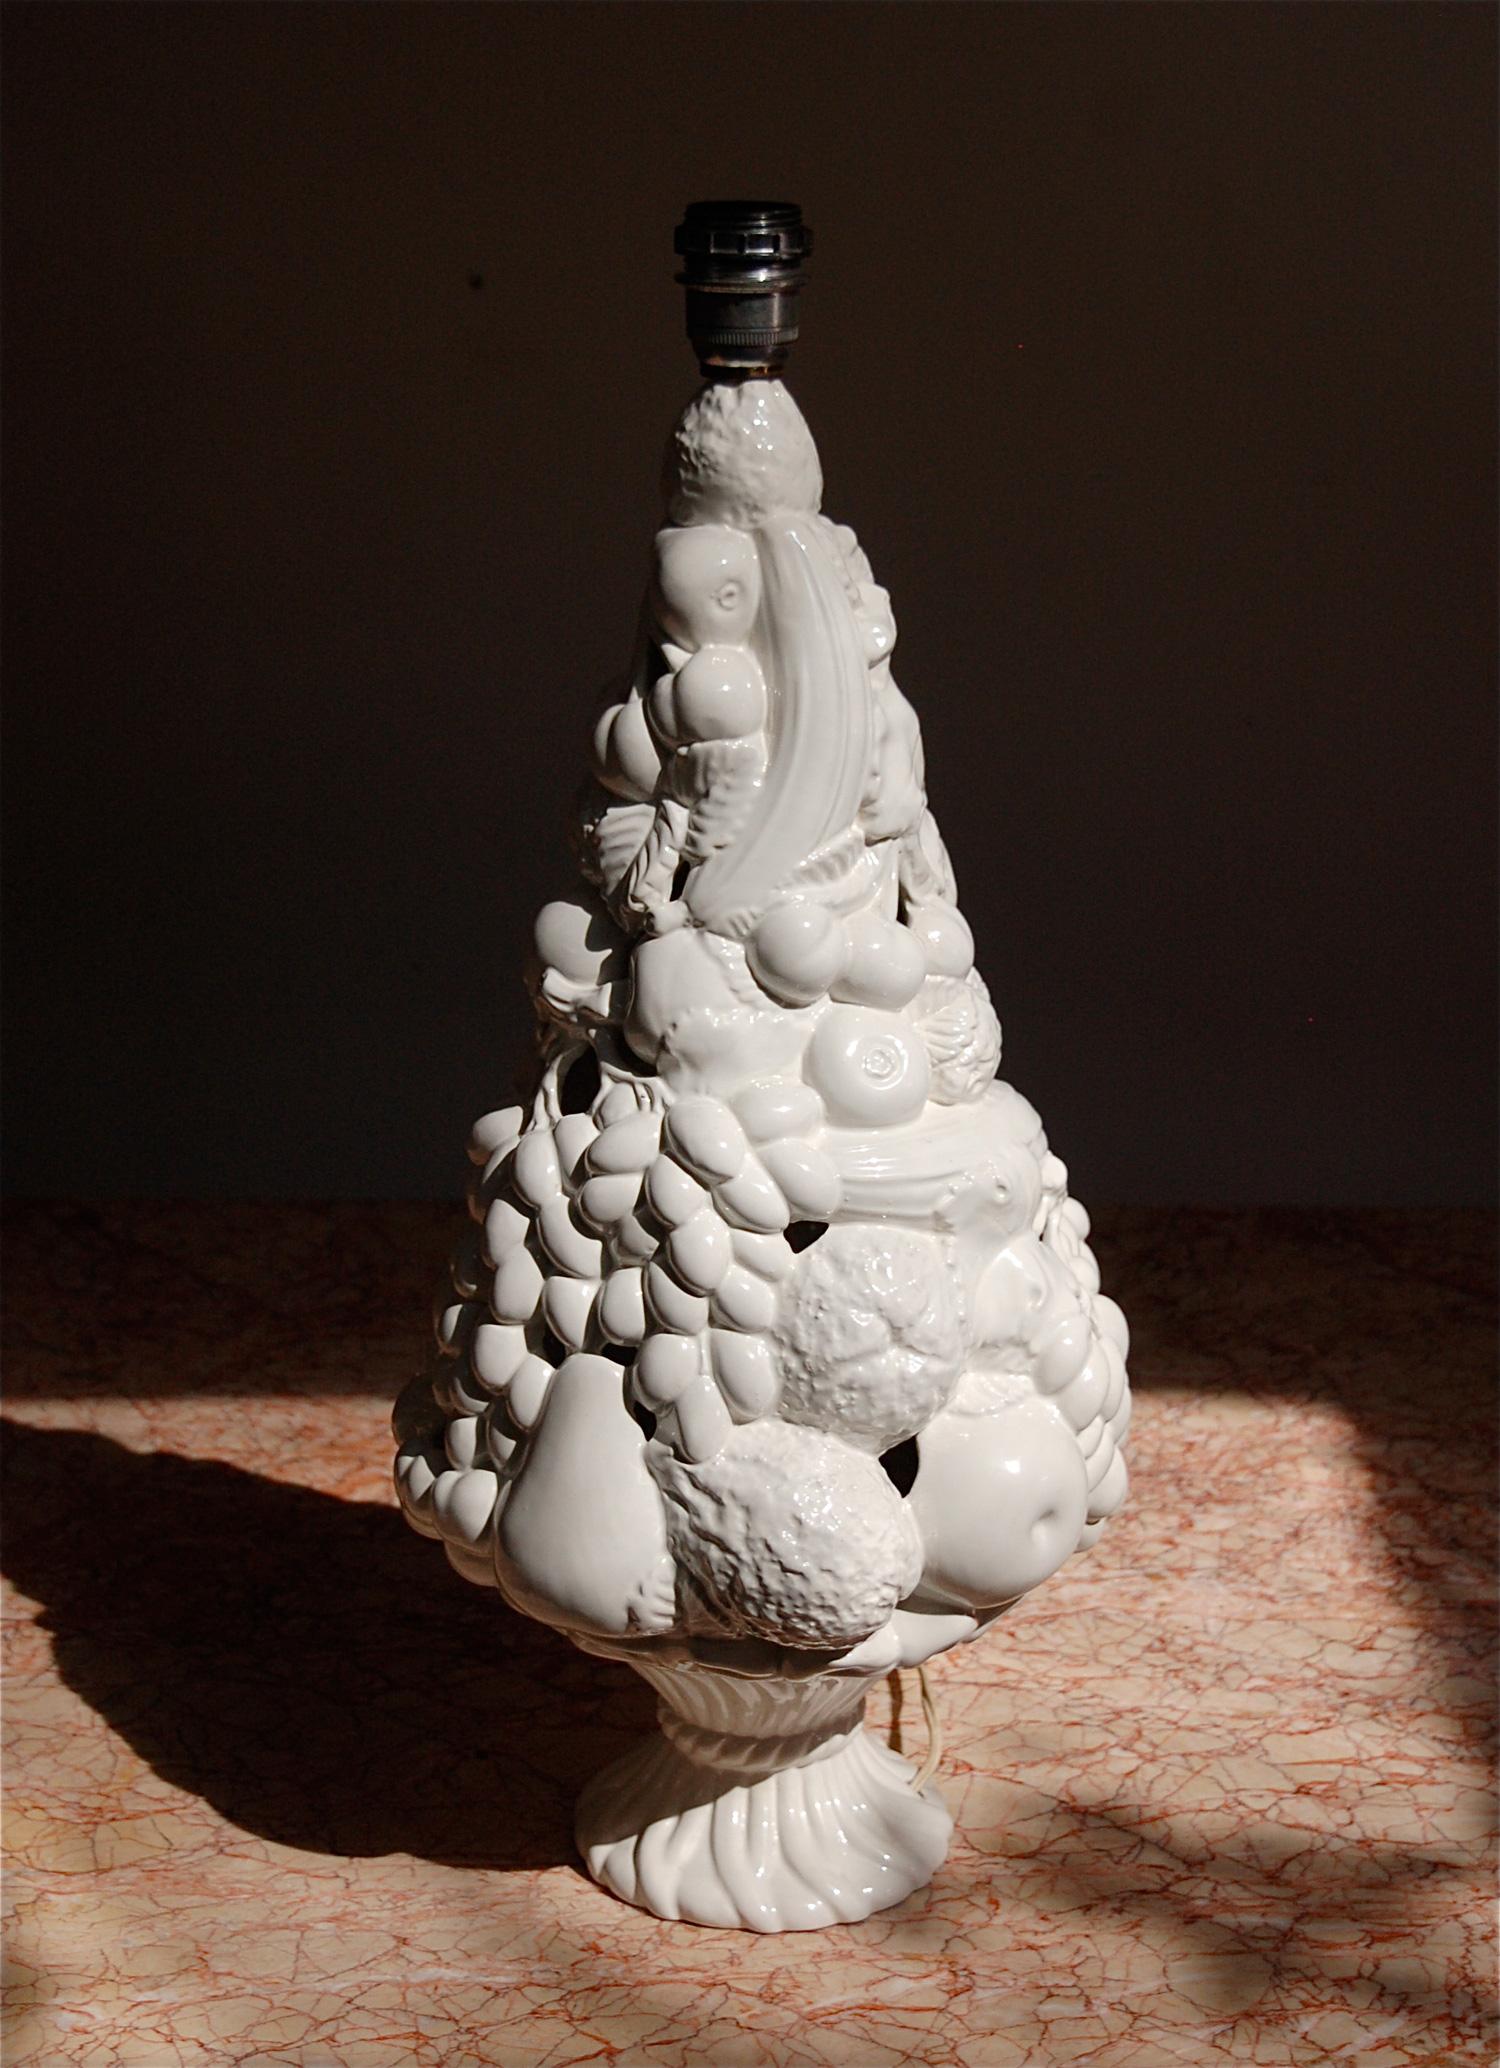 Tall, Italian ceramic table lamp in the shape of a overladen, well stacked fruit basket. A closer look reveals detailed features among the cluster of different fruits (bananas, apples, citrus, grapes, ...). Ceramic base with glossy, white glaze.